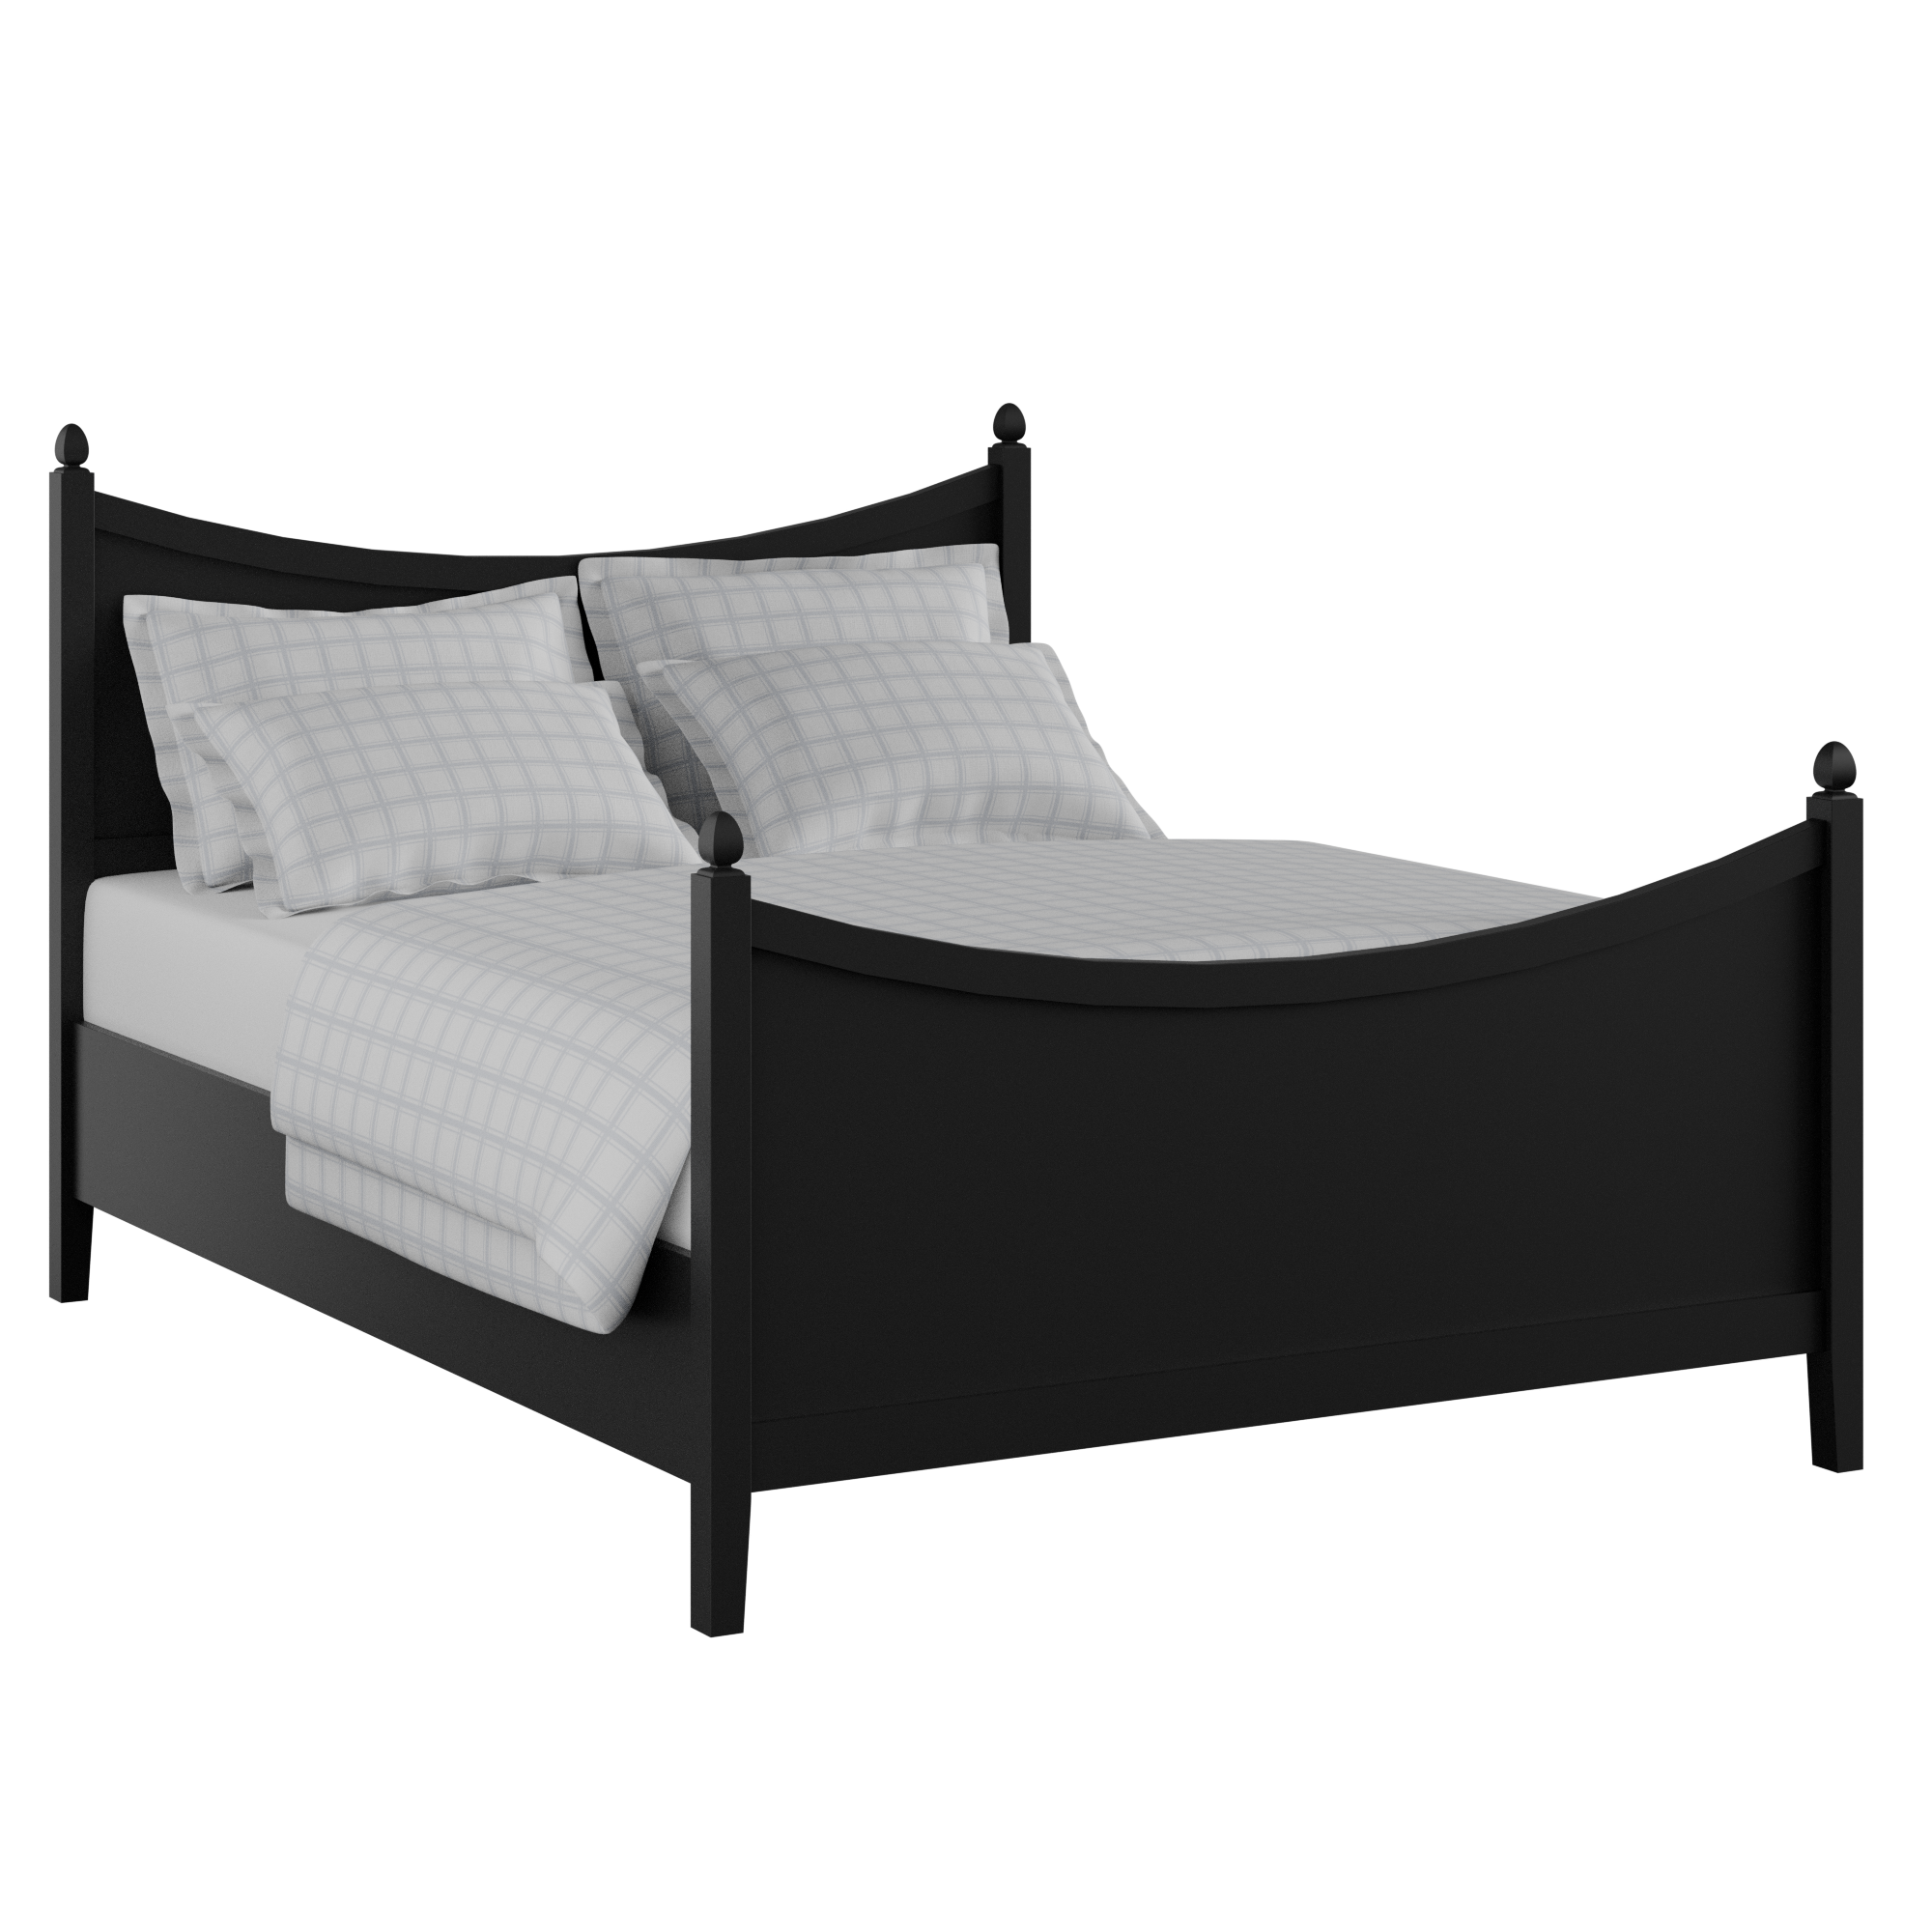 Blake Painted painted wood bed in black with Juno mattress